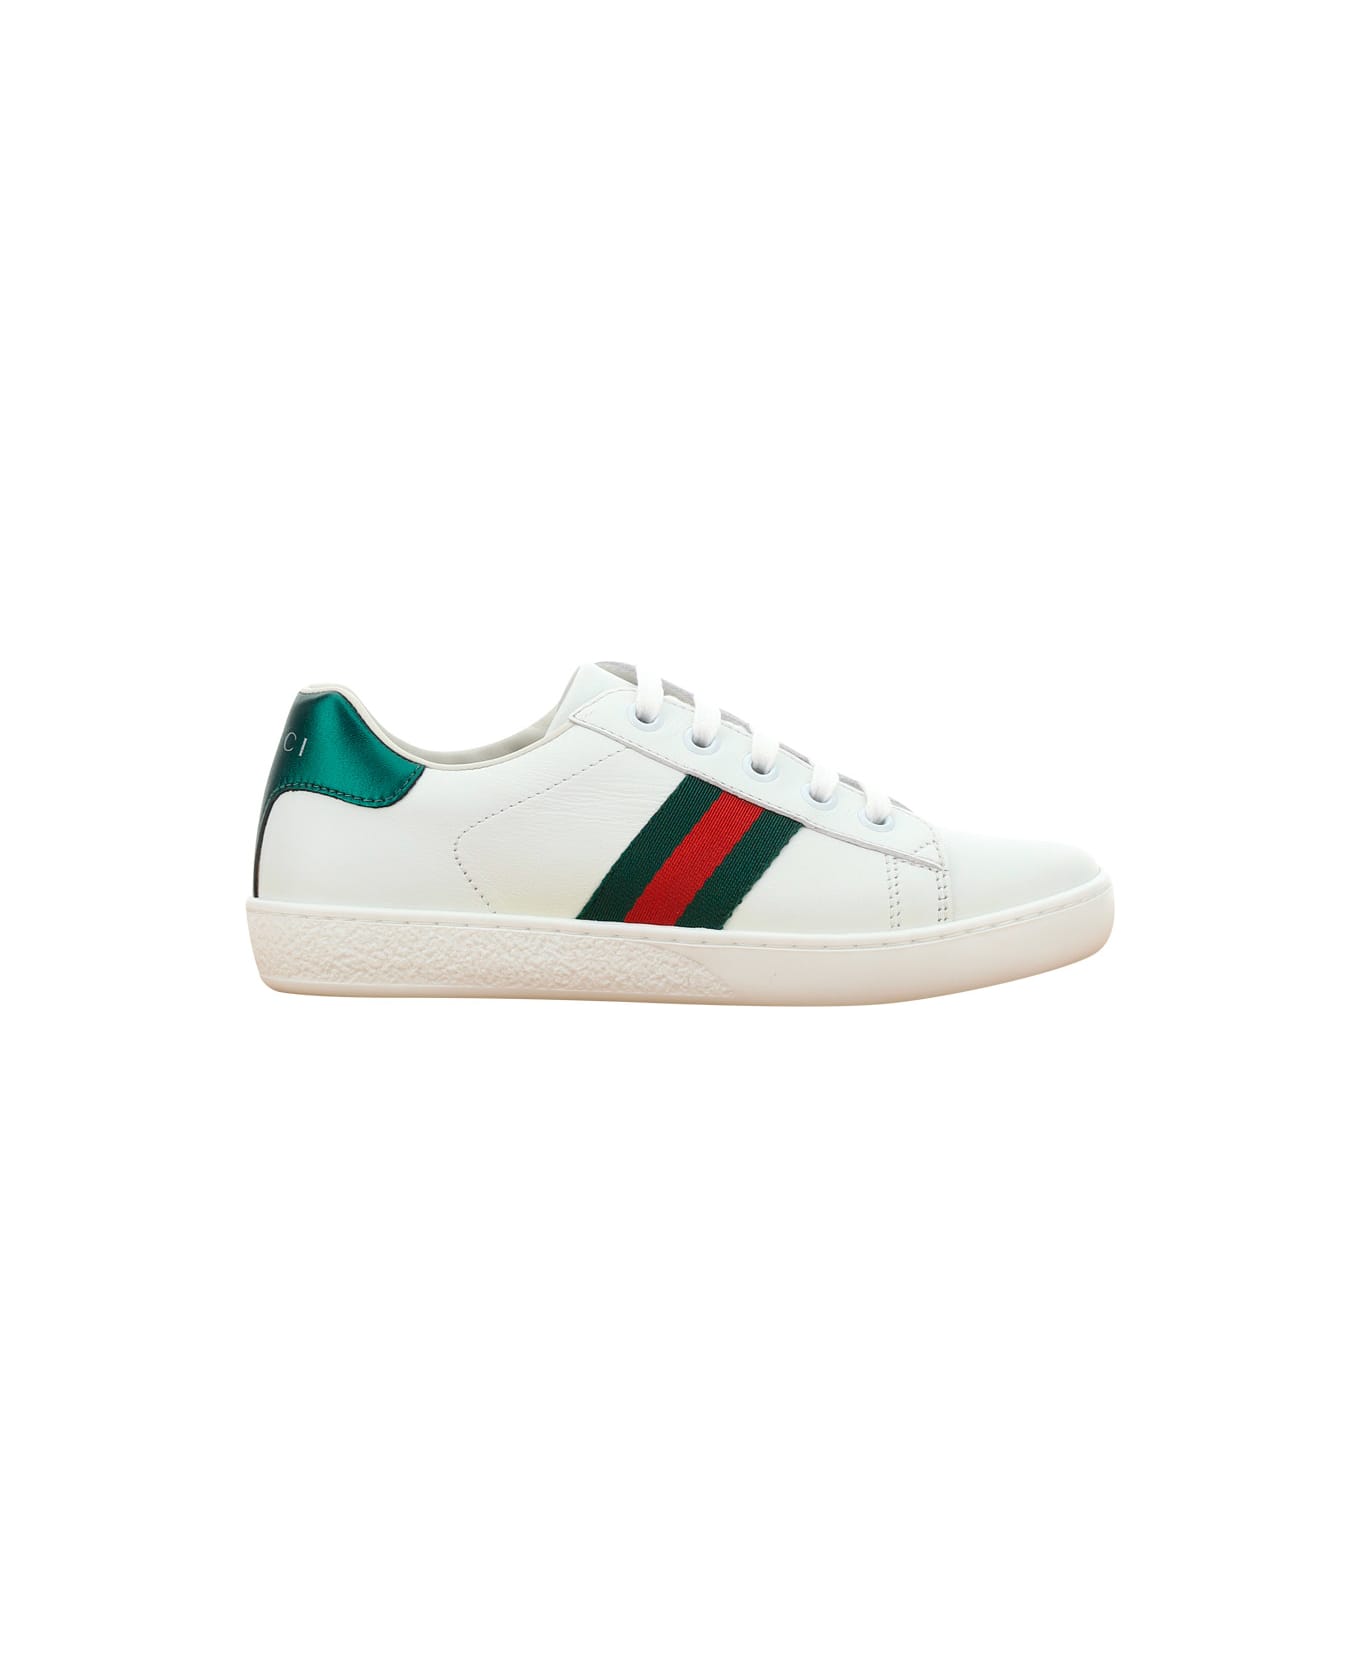 Gucci Ace Sneakers For Boy - White シューズ